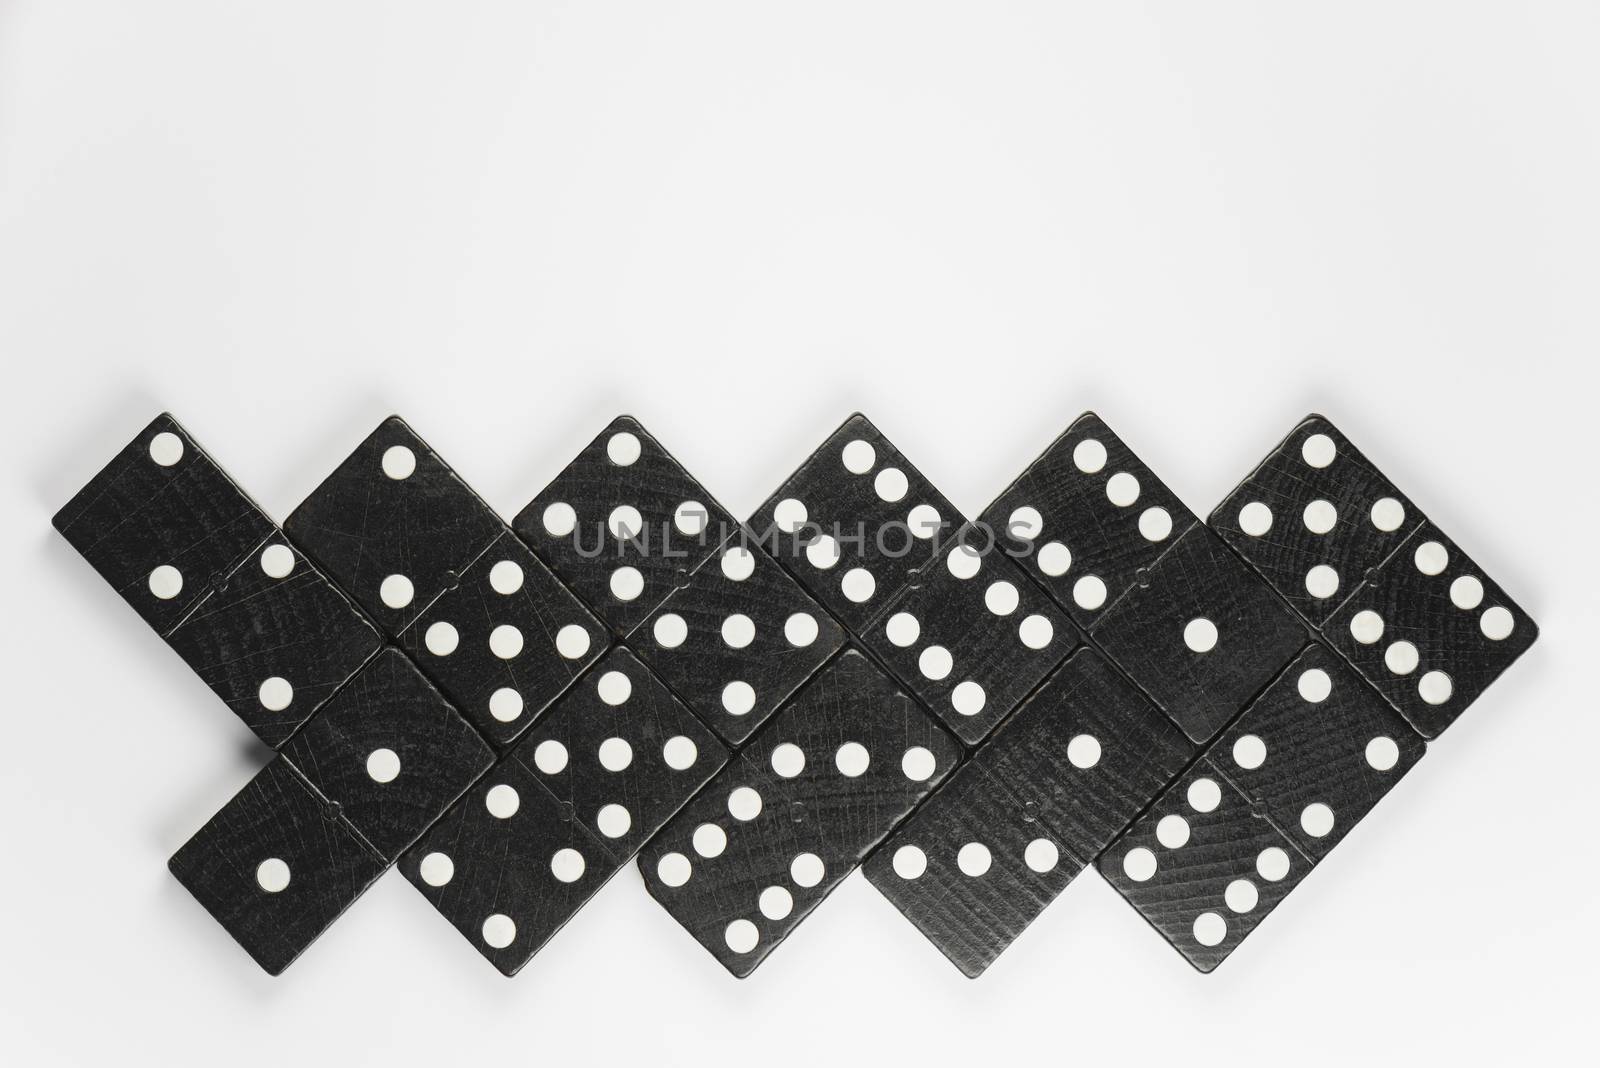 Composition of lying black domino bricks with white dots
